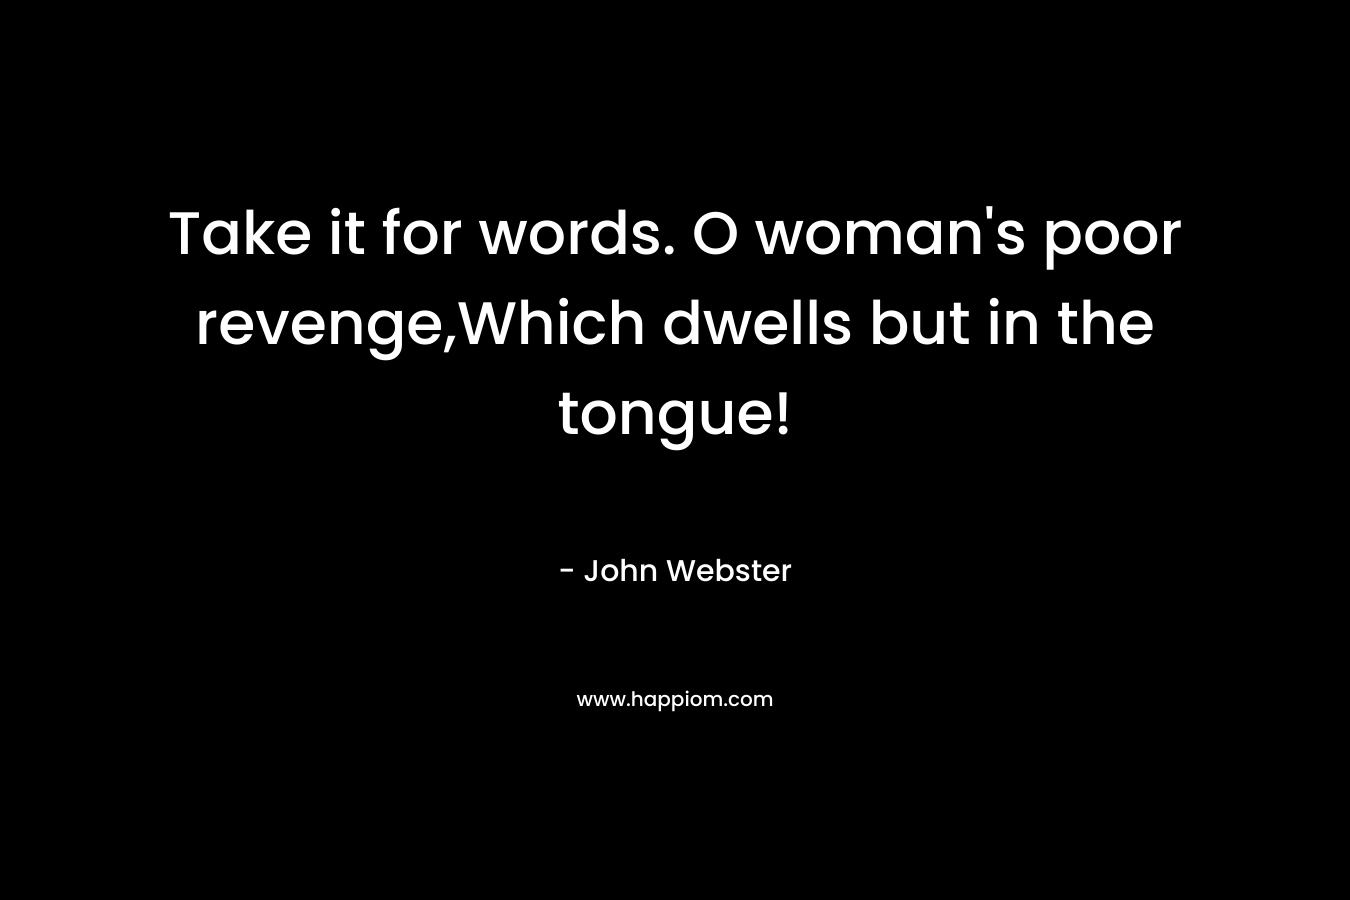 Take it for words. O woman's poor revenge,Which dwells but in the tongue!